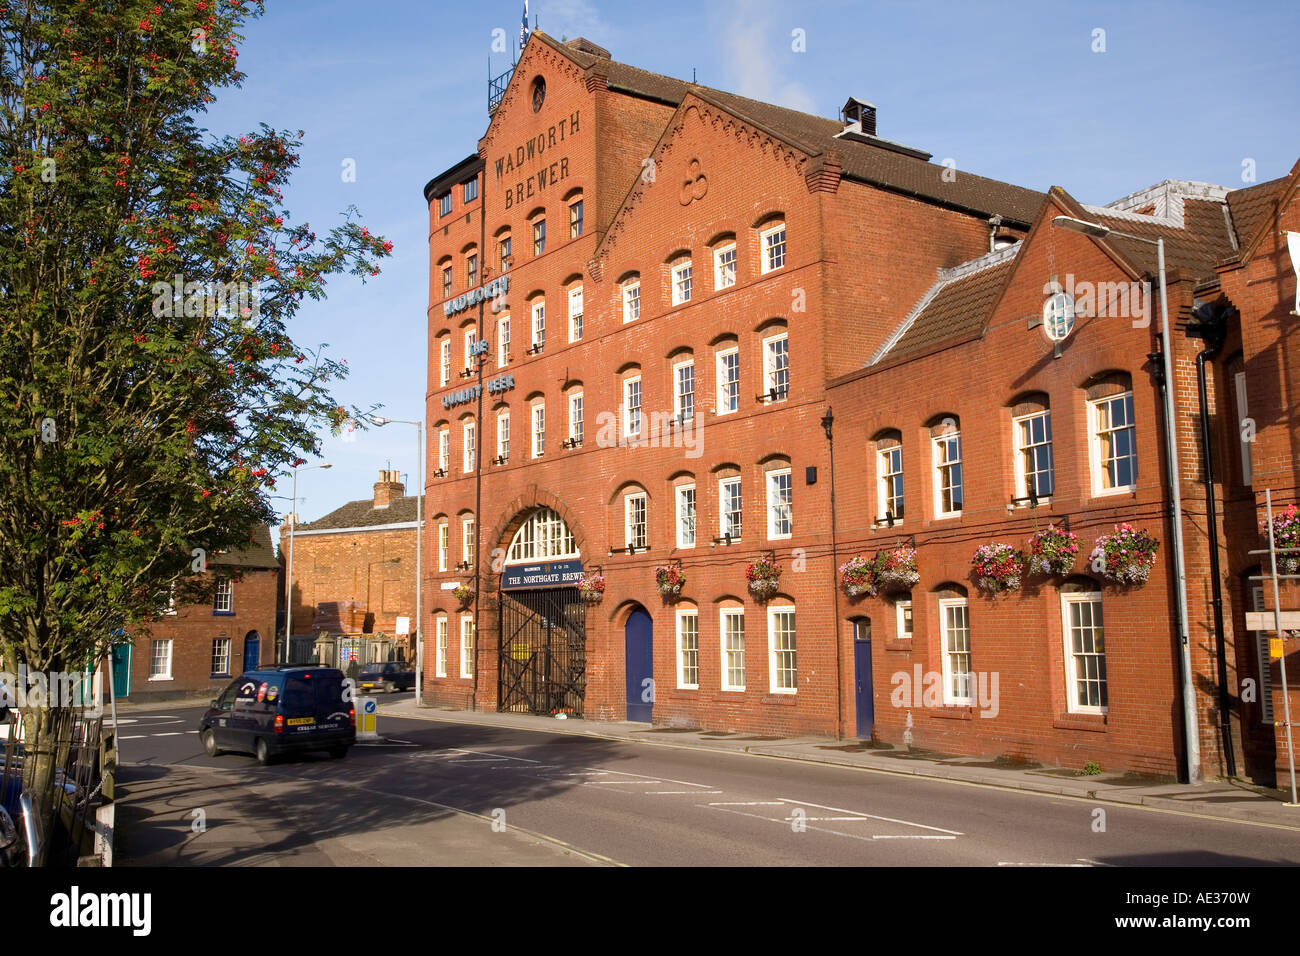 The Wadworth brewery Devizes Wiltshire UK Stock Photo